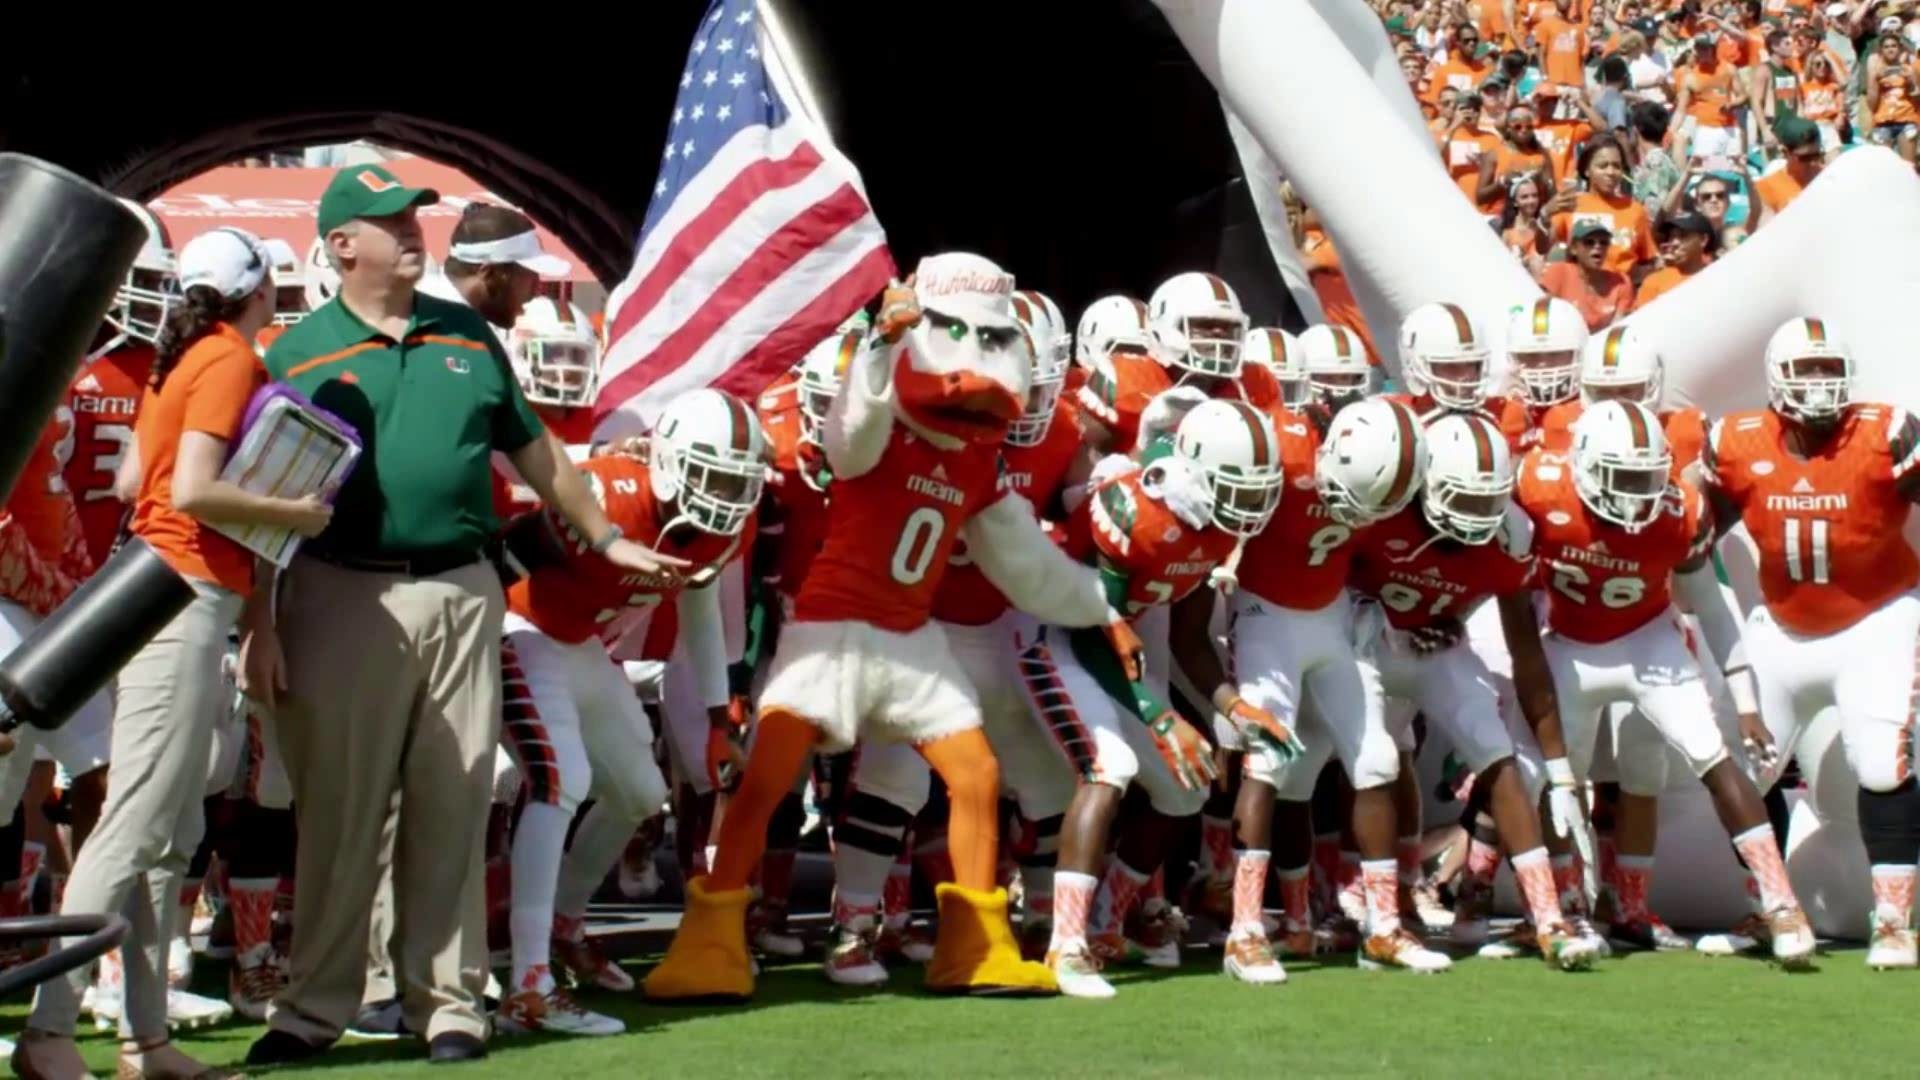 1920x1080 Miami Hurricanes Football — Latest News, Images and Photos — CrypticImages